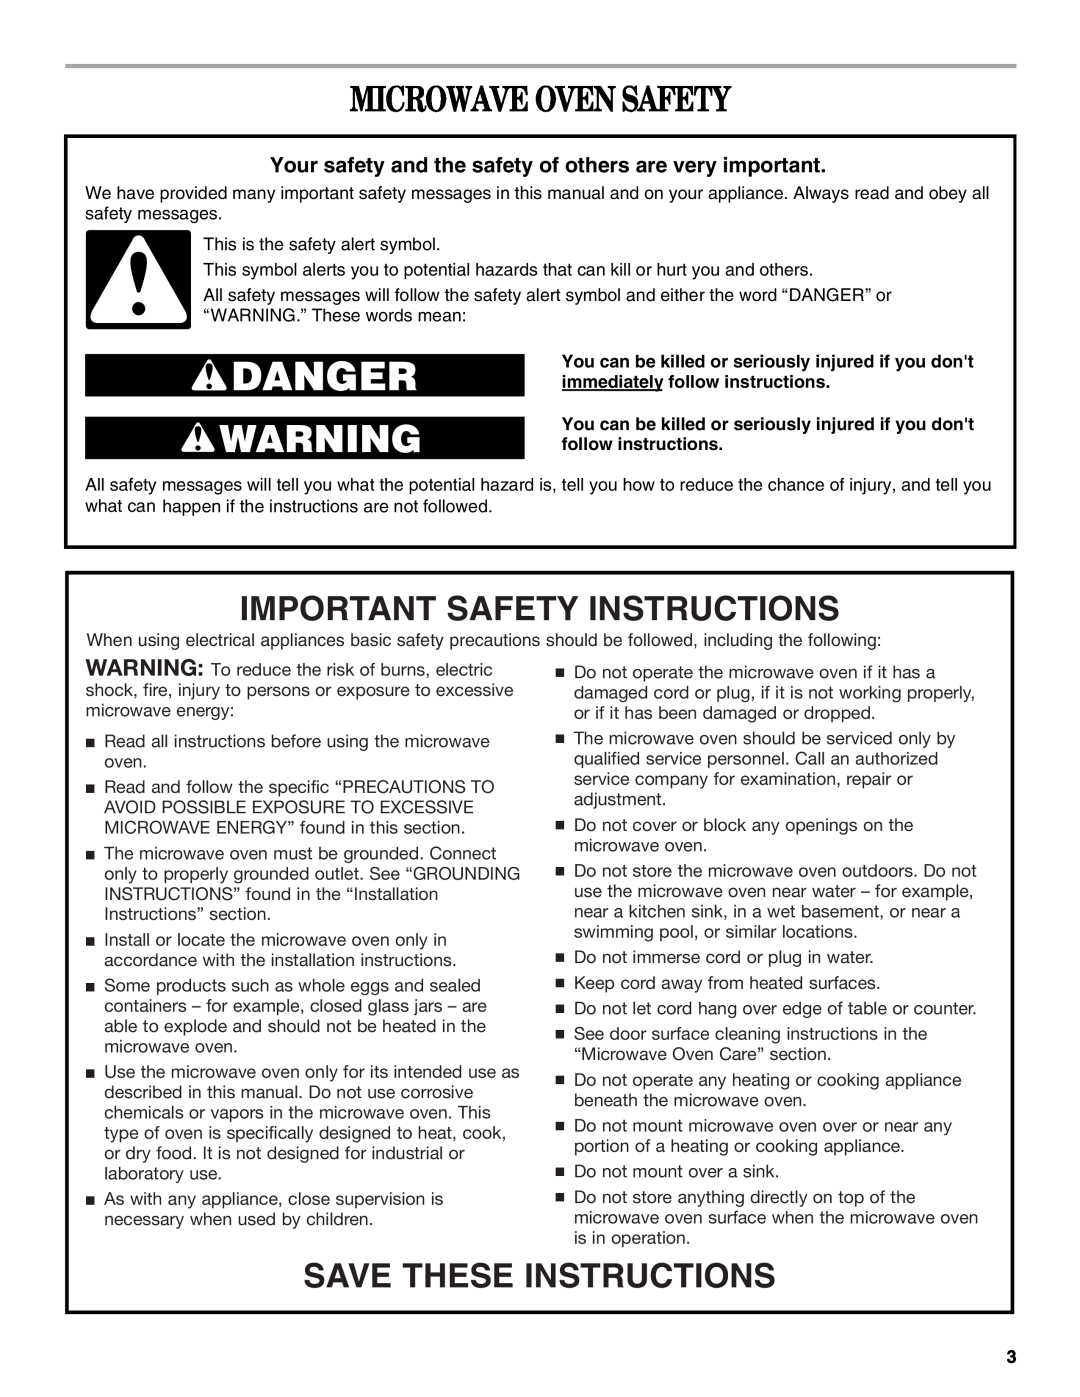 Whirlpool MT4078SP manual Microwave Oven Safety, Important Safety Instructions, Save These Instructions 